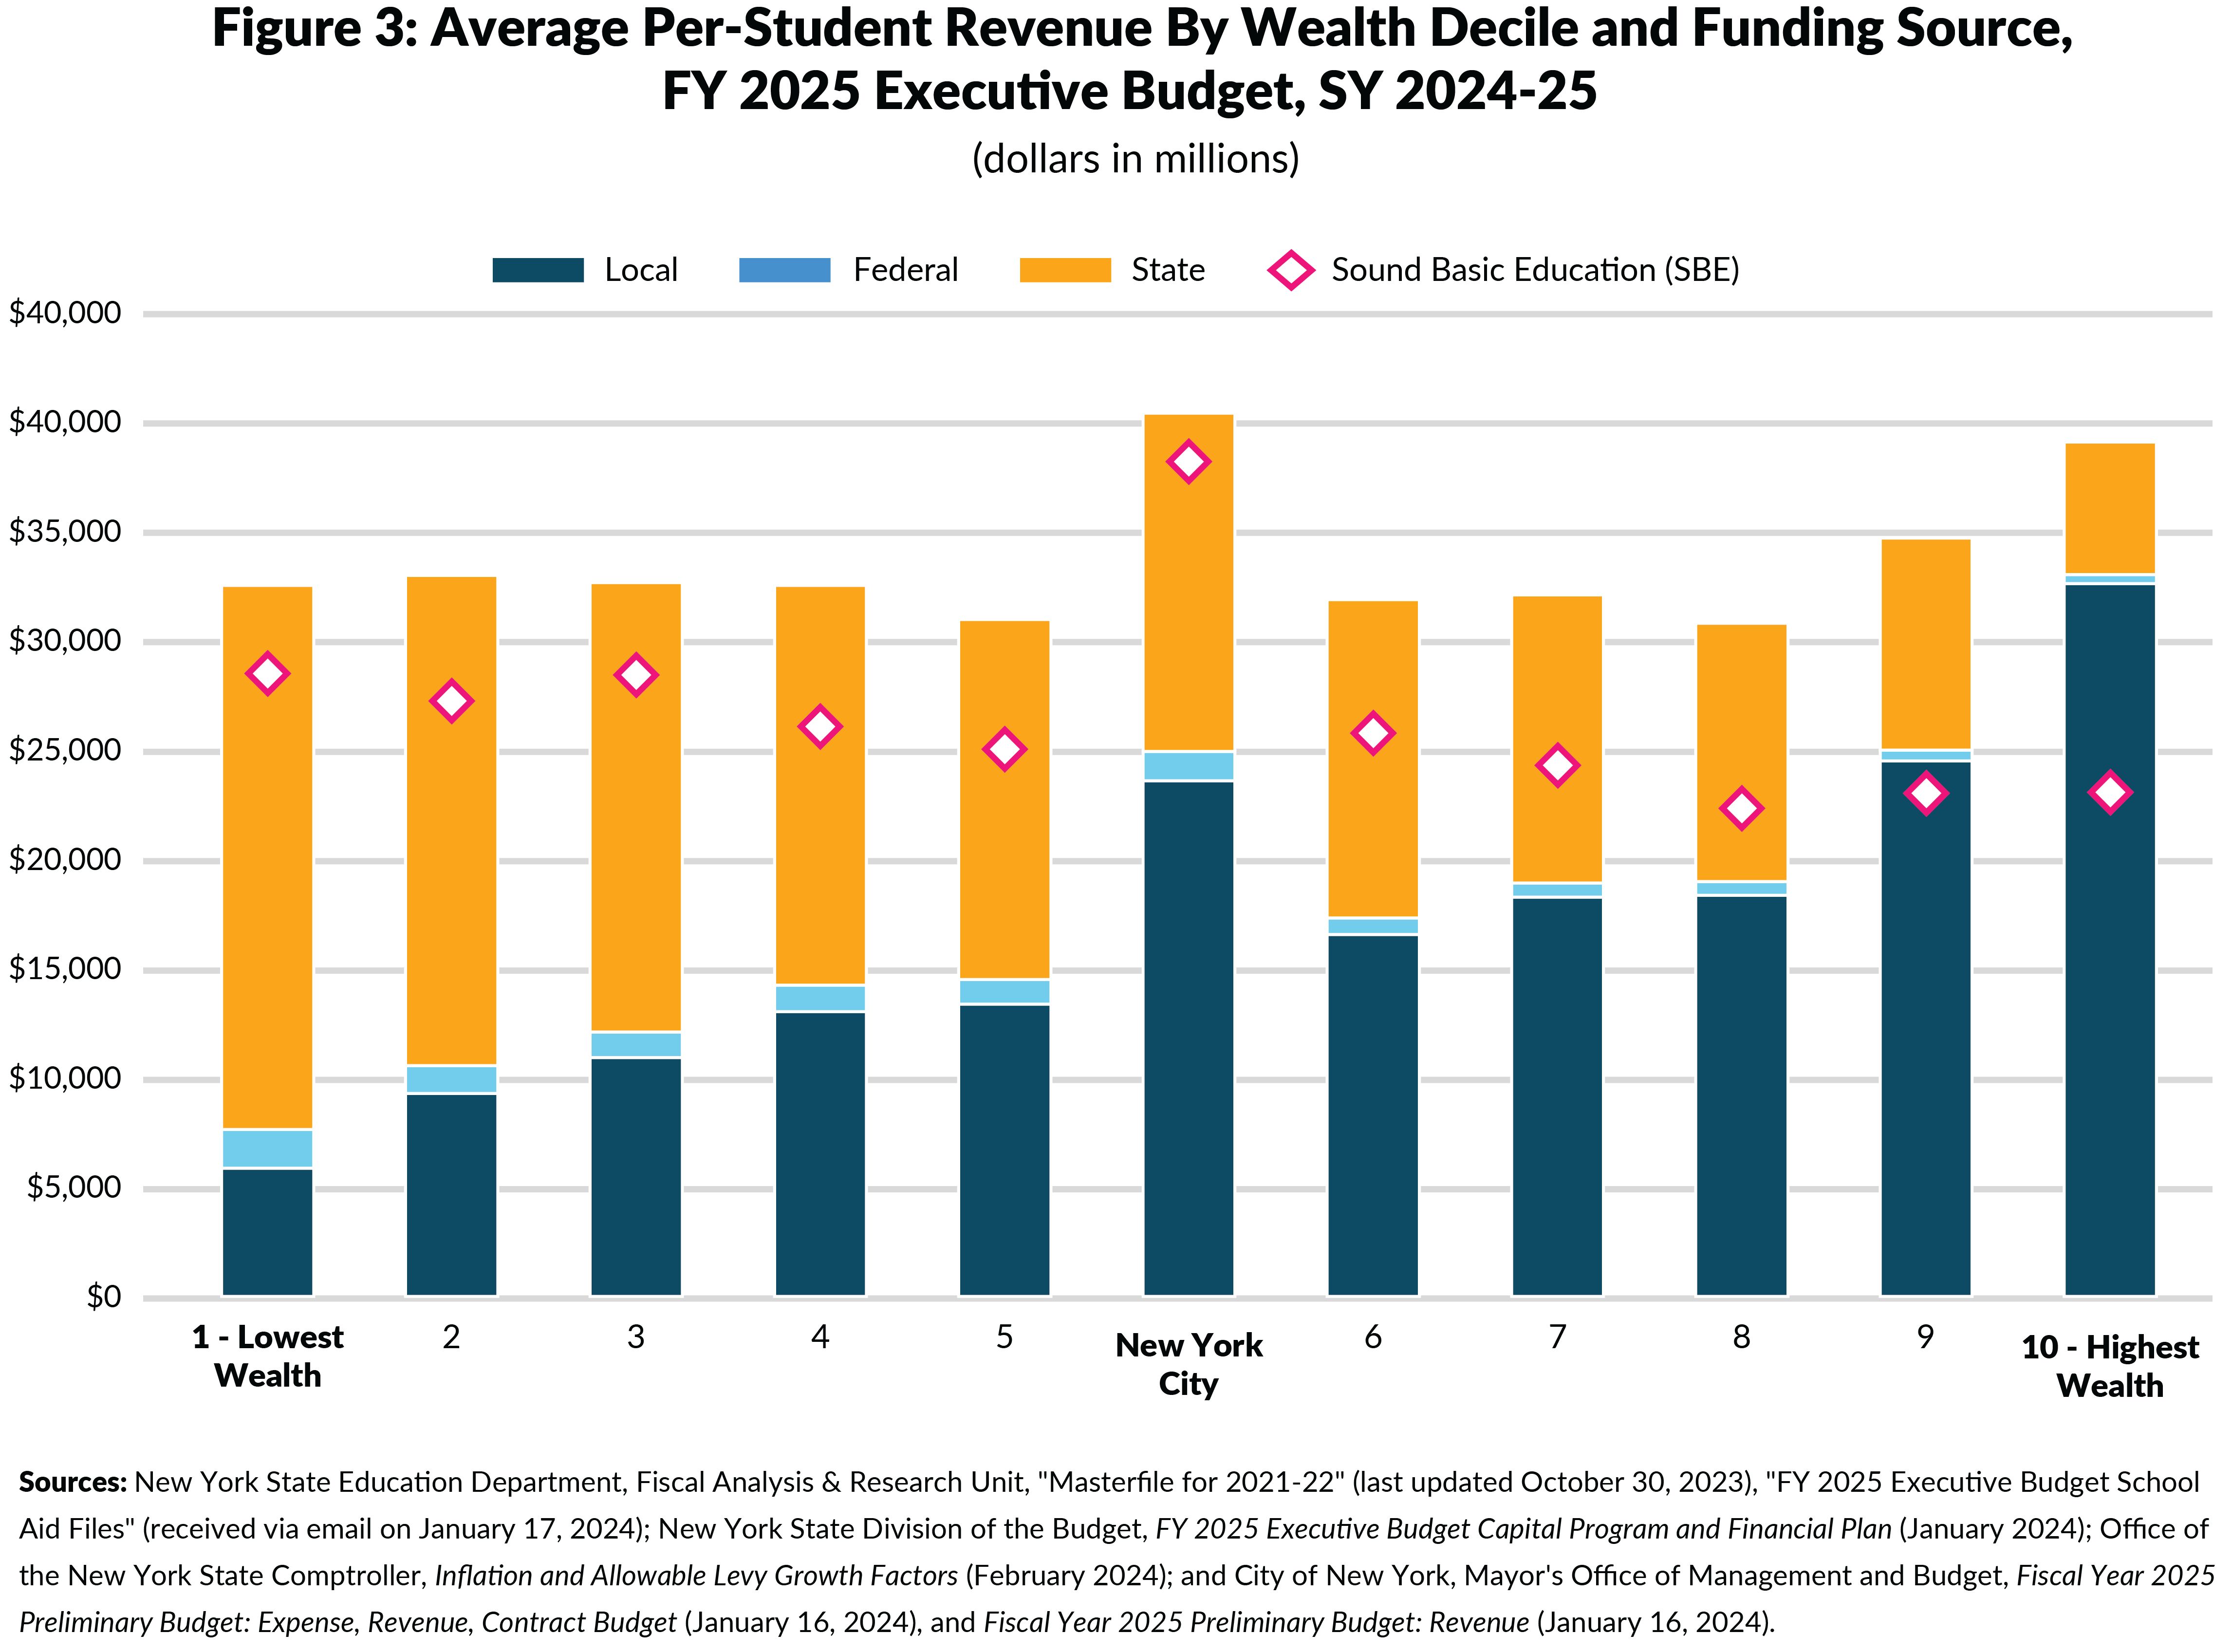 Figure 3: Average Per-Student Revenue By Wealth Decile and Funding Source, FY2025 Executive Budget, SY 2024-25